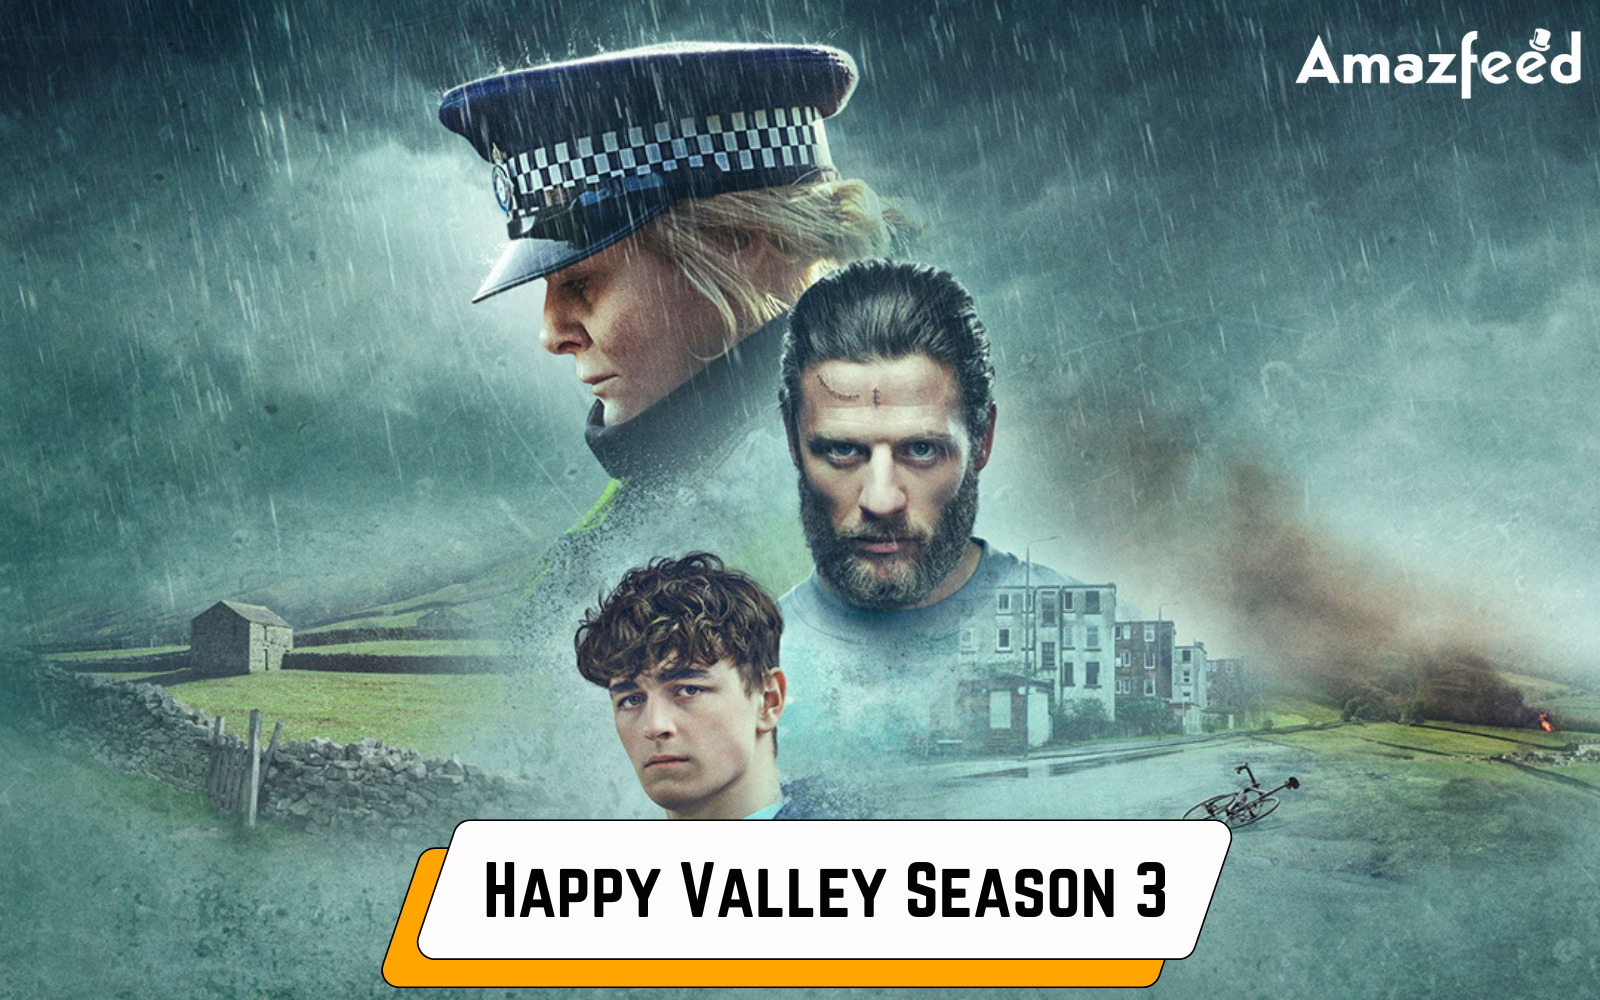 Happy Valley season 3 Release Date, Cast, Plot, Trailer, Where to Watch